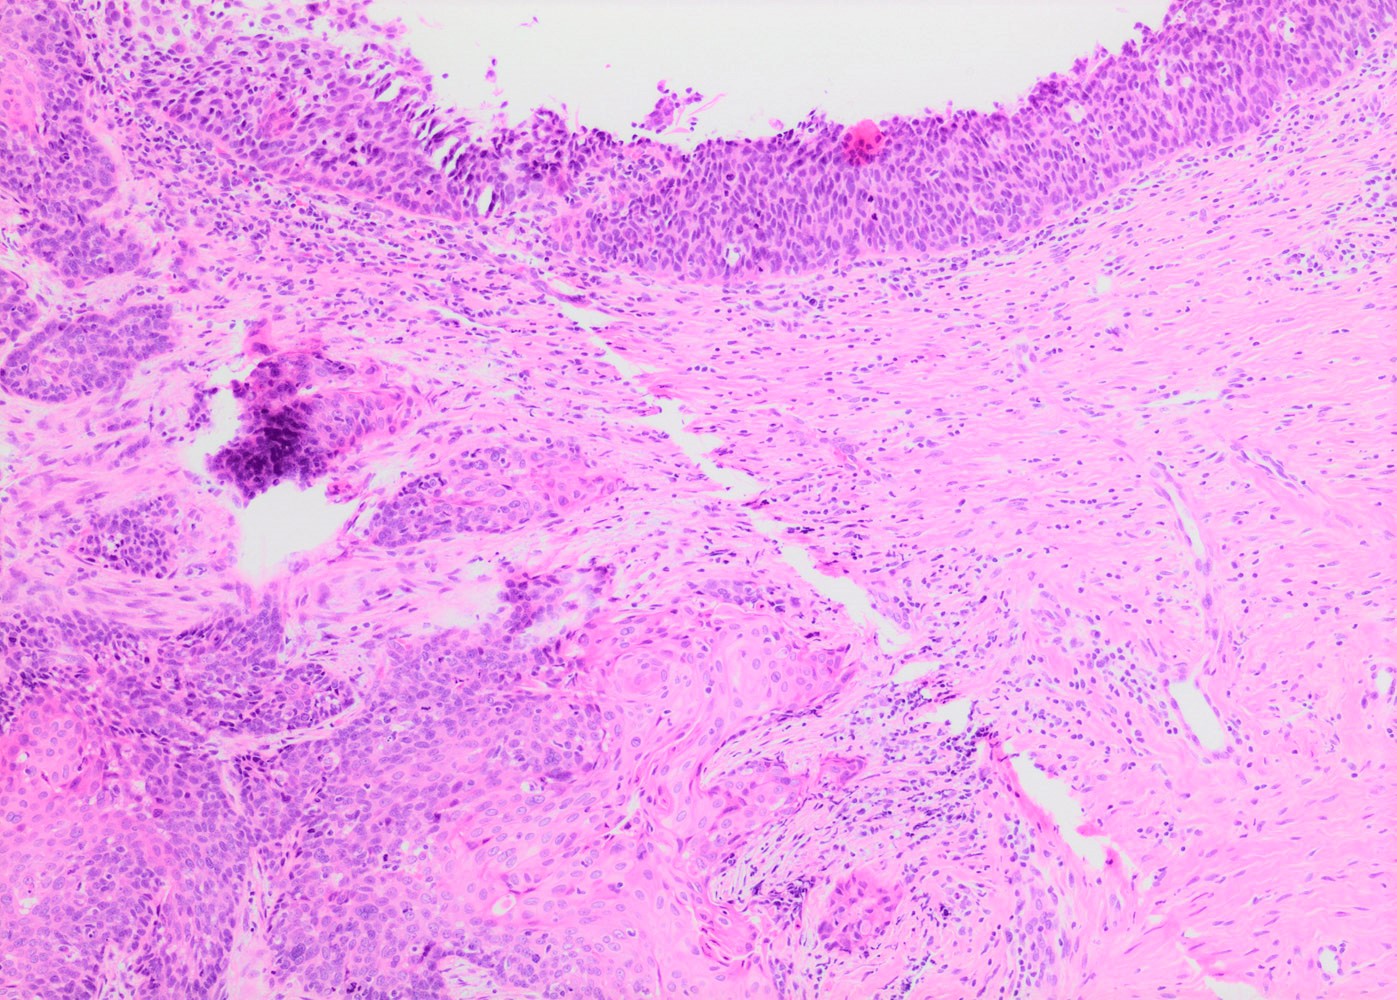 HSIL / CIN III with adjacent squamous cell carcinoma